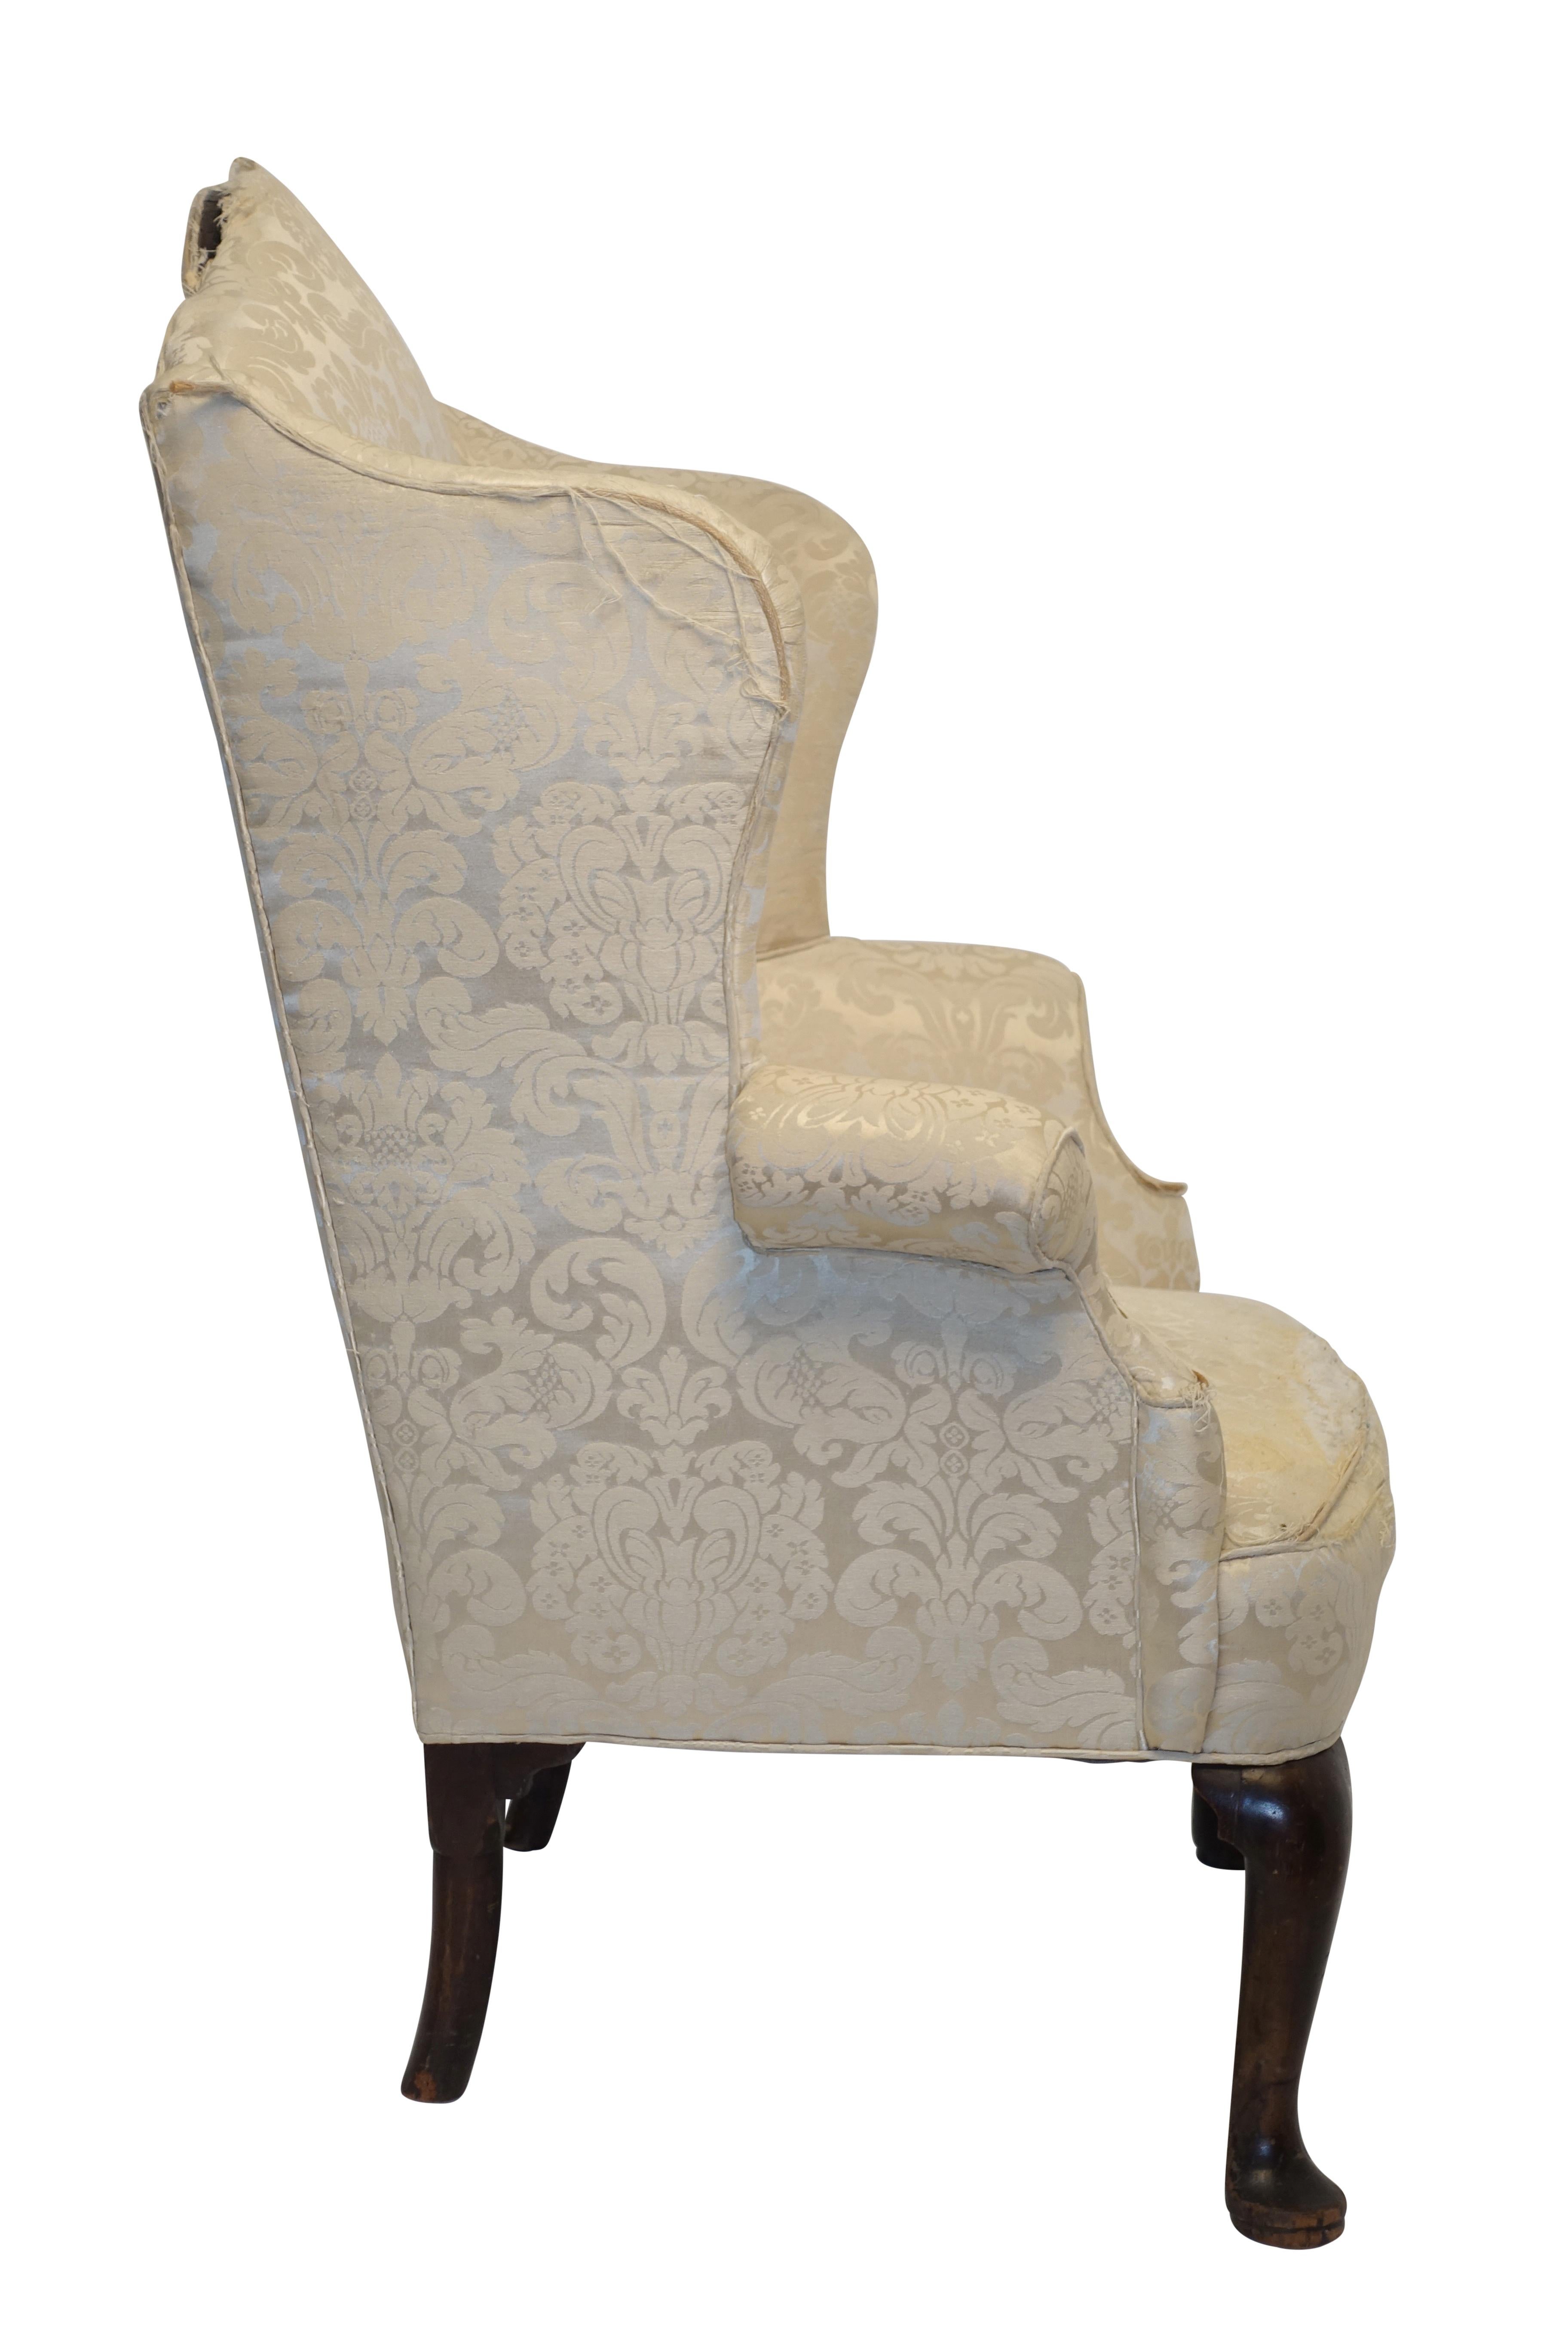 An excellent example of a Georgian wingback armchair. Having shapely wings and arch top backrest with swooping arms, standing on a pair of Queen Anne legs with pad feet on the front and very typical round Georgian back legs. England, circa 1800.